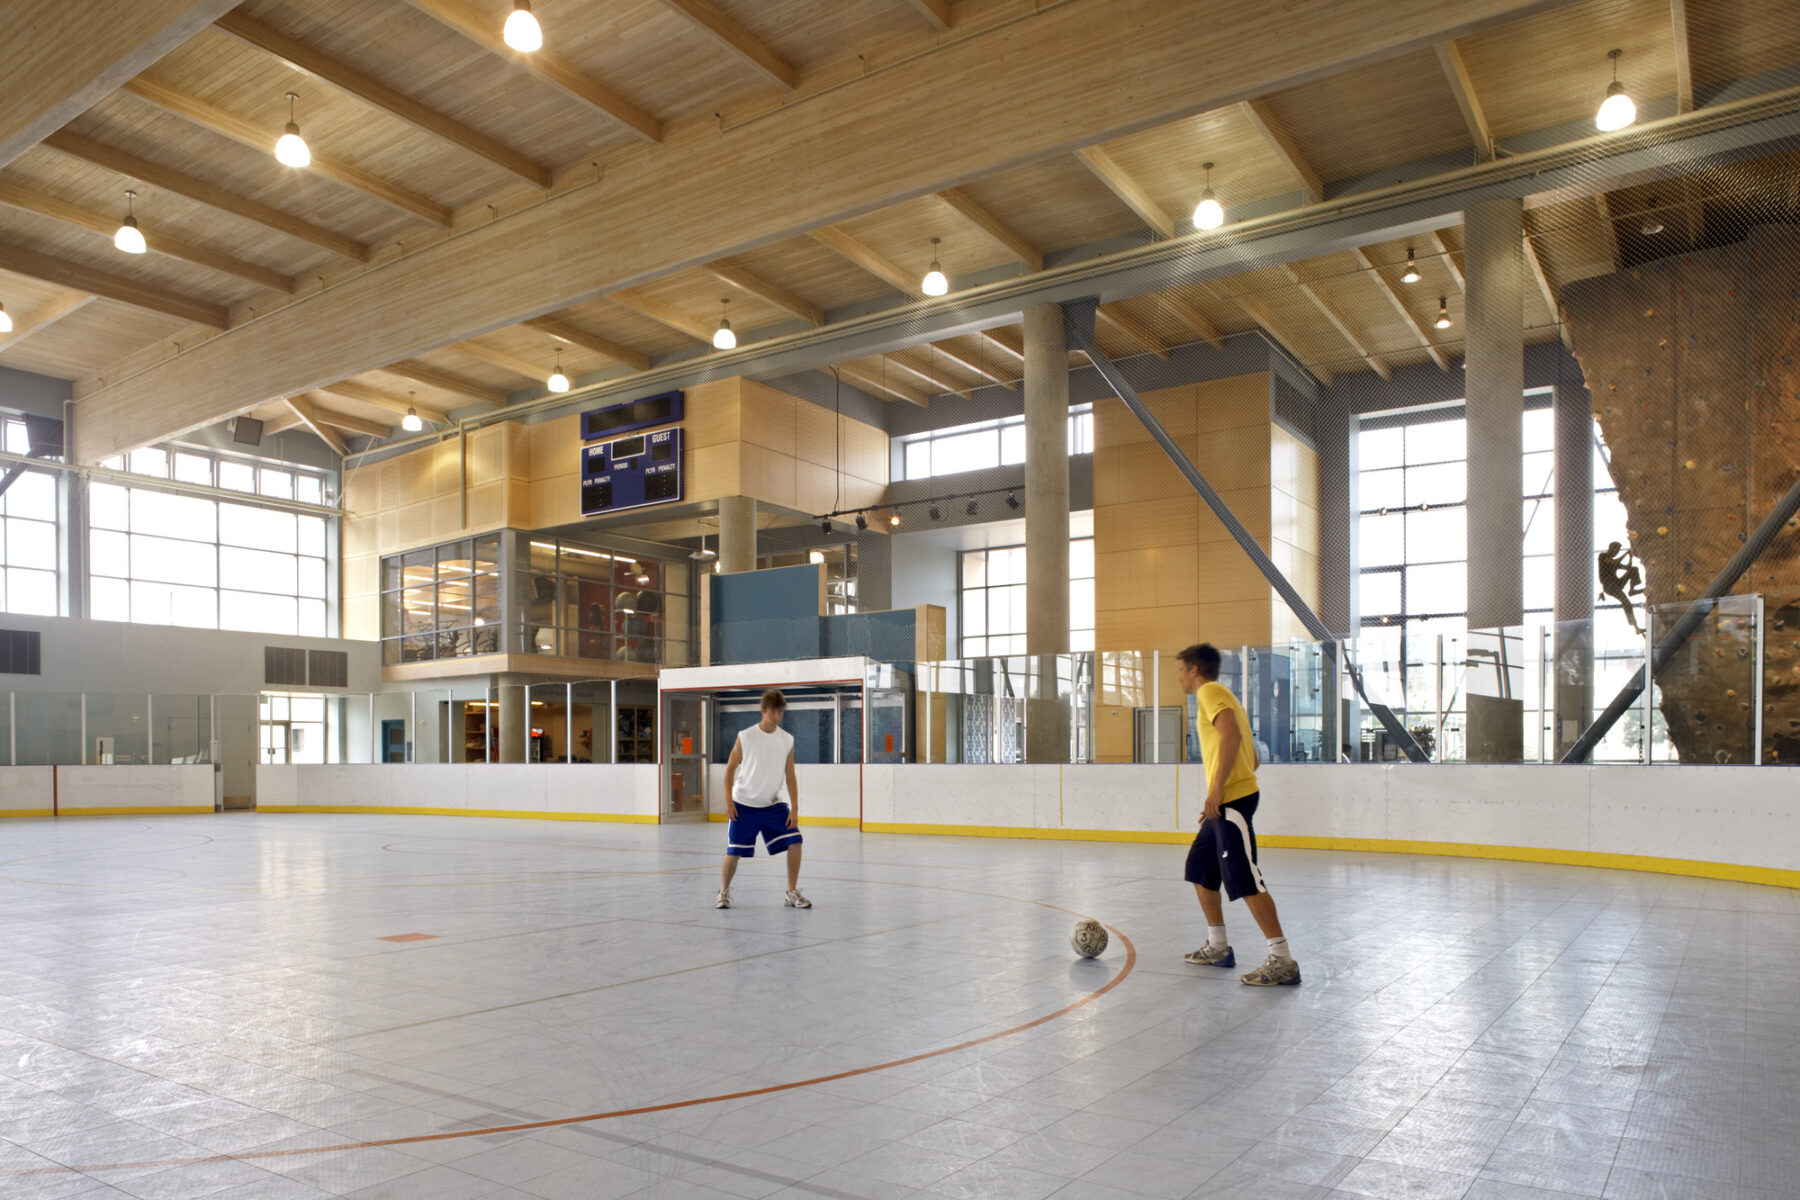 color photo of two young men playing soccer indoors in lofty, timber-paneled rec room